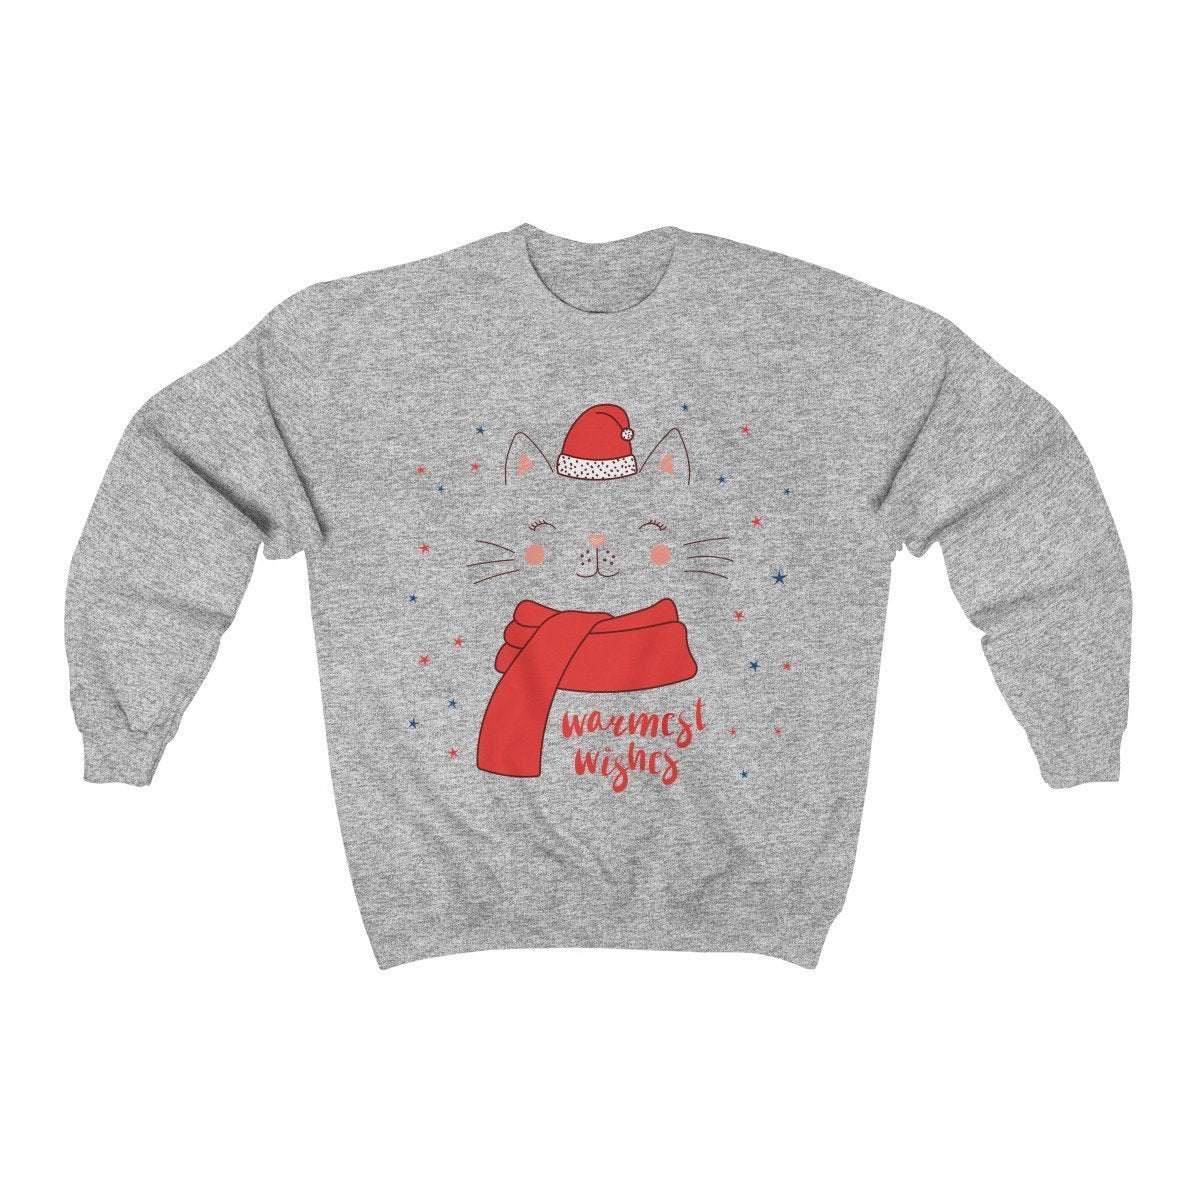 Ugly Cat Sweater, Funny Christmas Cat Sweater for Cat Lovers Decorated with a Cat Wearing a Santa Hat and the Text Warmest Wishes Printed On the Front